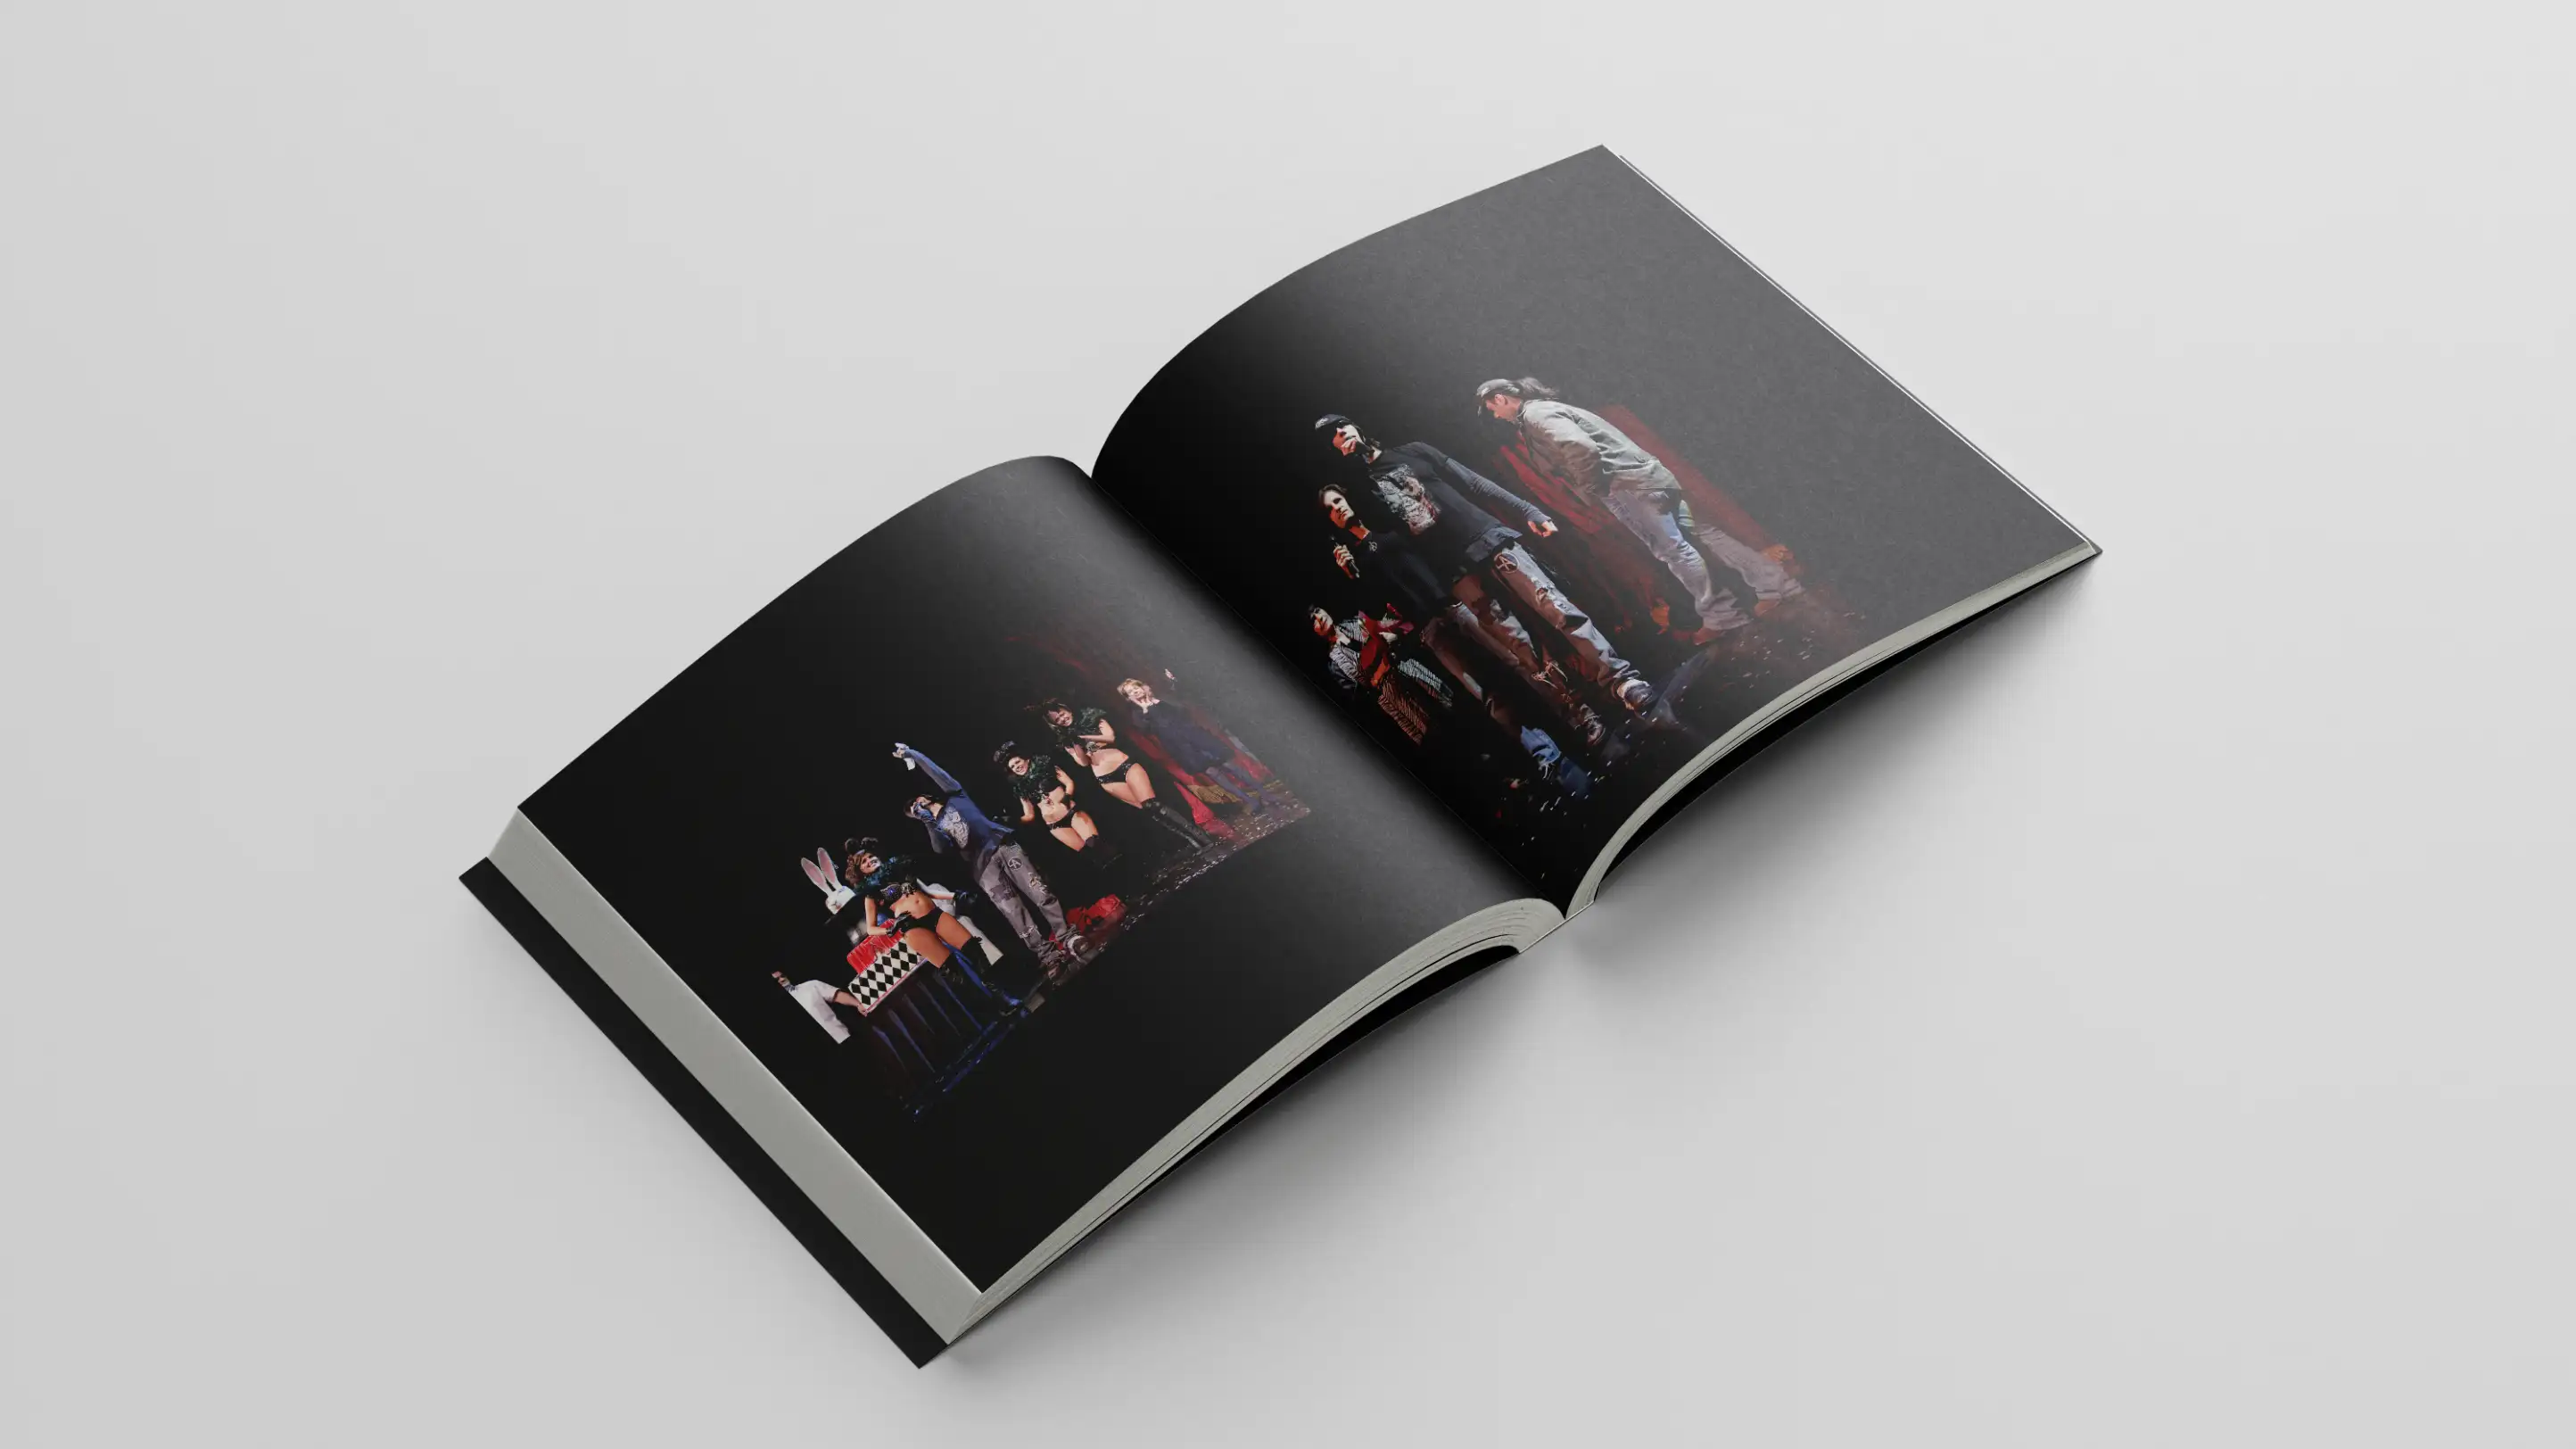 Book open to interior spread of photos from Criss Angel performance.